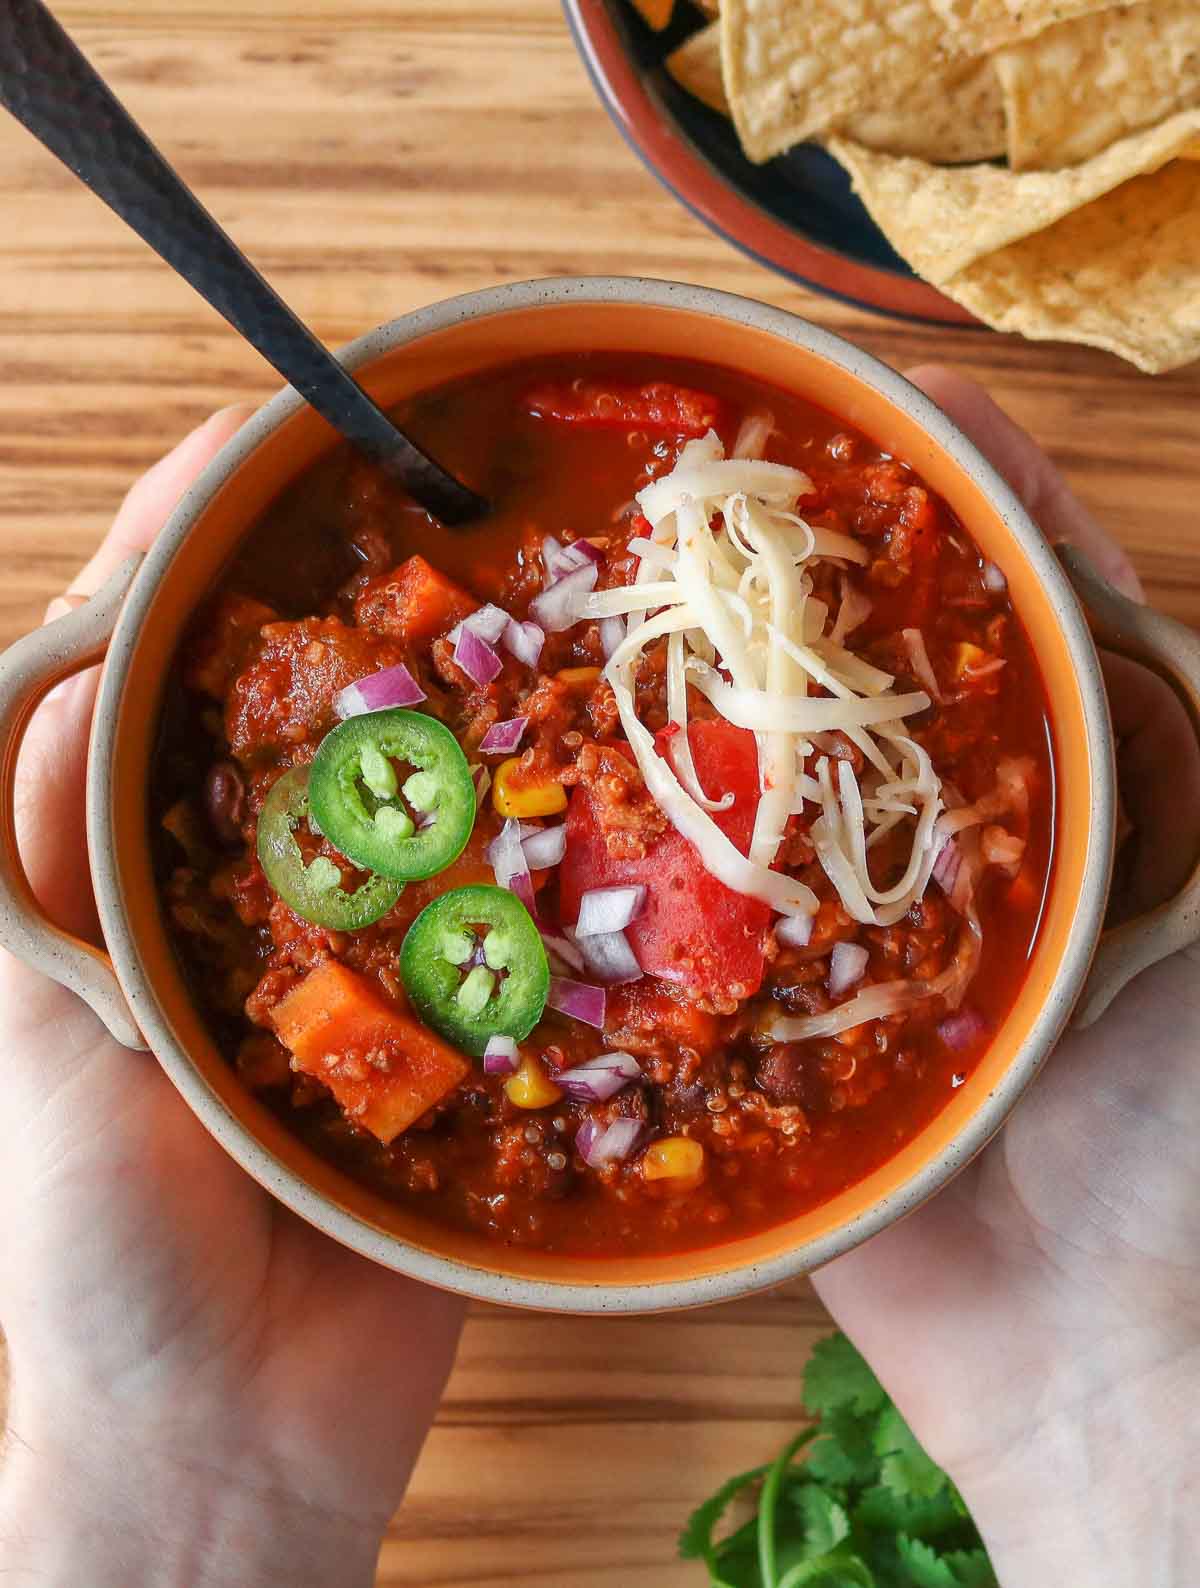 Two hands holding a bowl of chili.